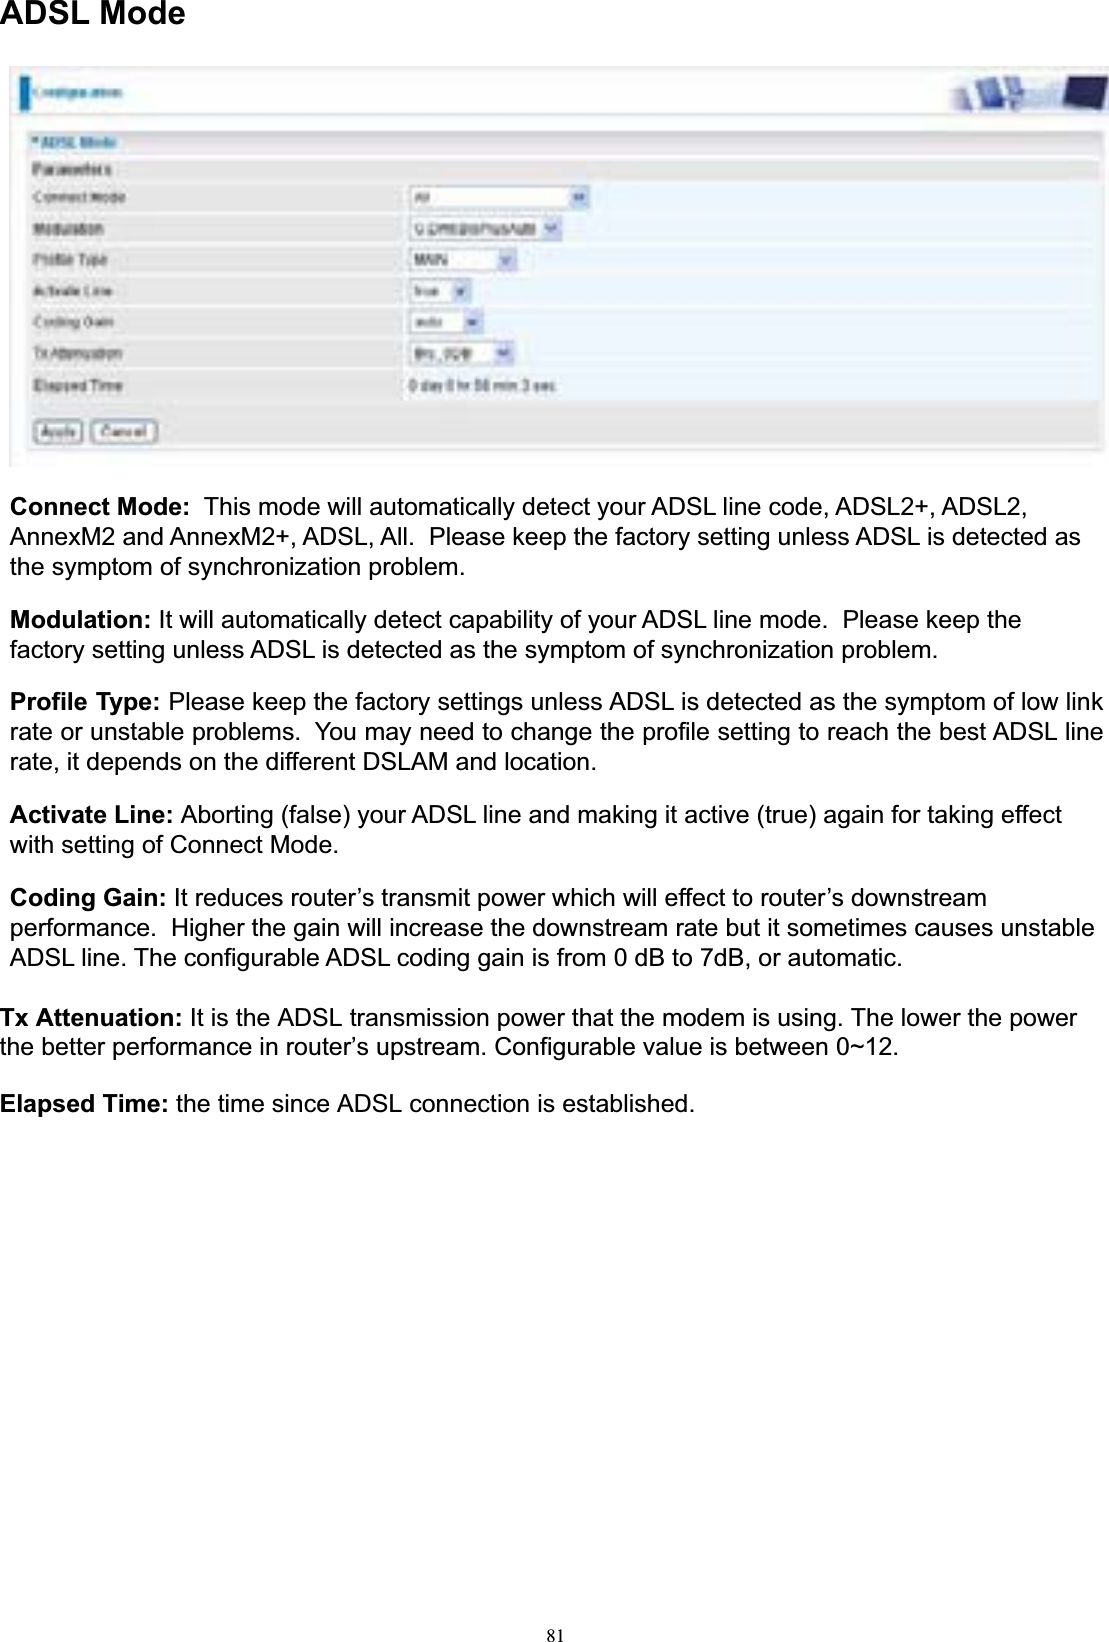 81ADSL ModeConnect Mode:  This mode will automatically detect your ADSL line code, ADSL2+, ADSL2, AnnexM2 and AnnexM2+, ADSL, All.  Please keep the factory setting unless ADSL is detected as the symptom of synchronization problem. Modulation: It will automatically detect capability of your ADSL line mode.  Please keep the factory setting unless ADSL is detected as the symptom of synchronization problem. Profile Type: Please keep the factory settings unless ADSL is detected as the symptom of low link rate or unstable problems.  You may need to change the profile setting to reach the best ADSL line rate, it depends on the different DSLAM and location. Activate Line: Aborting (false) your ADSL line and making it active (true) again for taking effect with setting of Connect Mode. Coding Gain: It reduces router’s transmit power which will effect to router’s downstream performance.  Higher the gain will increase the downstream rate but it sometimes causes unstable ADSL line. The configurable ADSL coding gain is from 0 dB to 7dB, or automatic. Tx Attenuation: It is the ADSL transmission power that the modem is using. The lower the power the better performance in router’s upstream. Configurable value is between 0~12. Elapsed Time: the time since ADSL connection is established. 